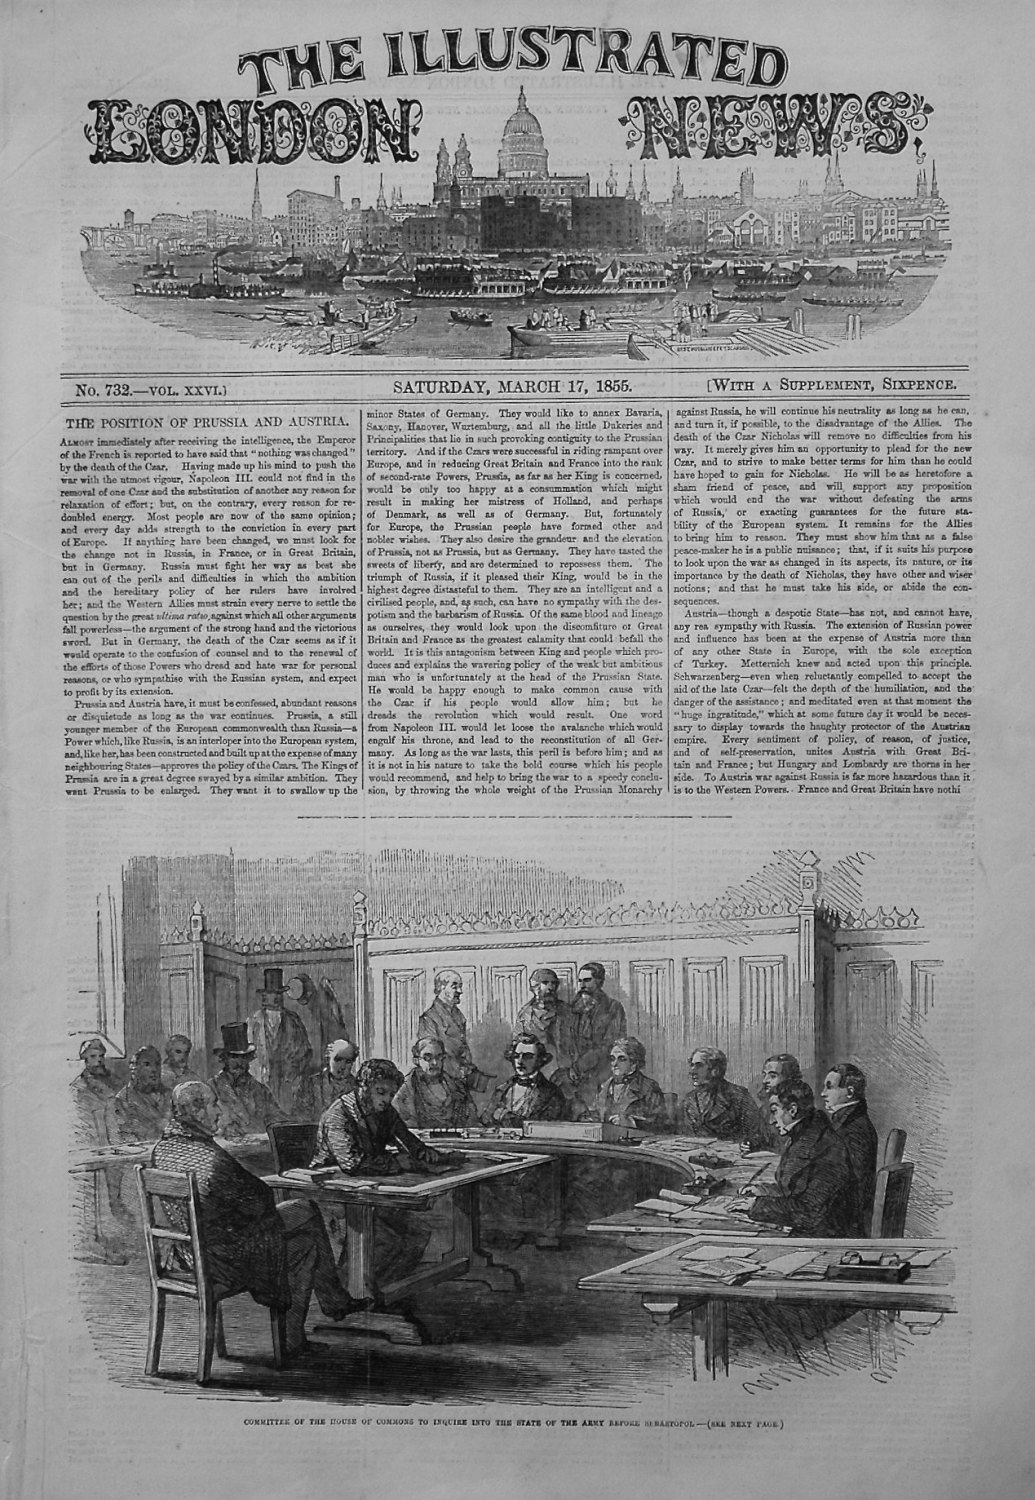 Illustrated London News March 17th 1855.